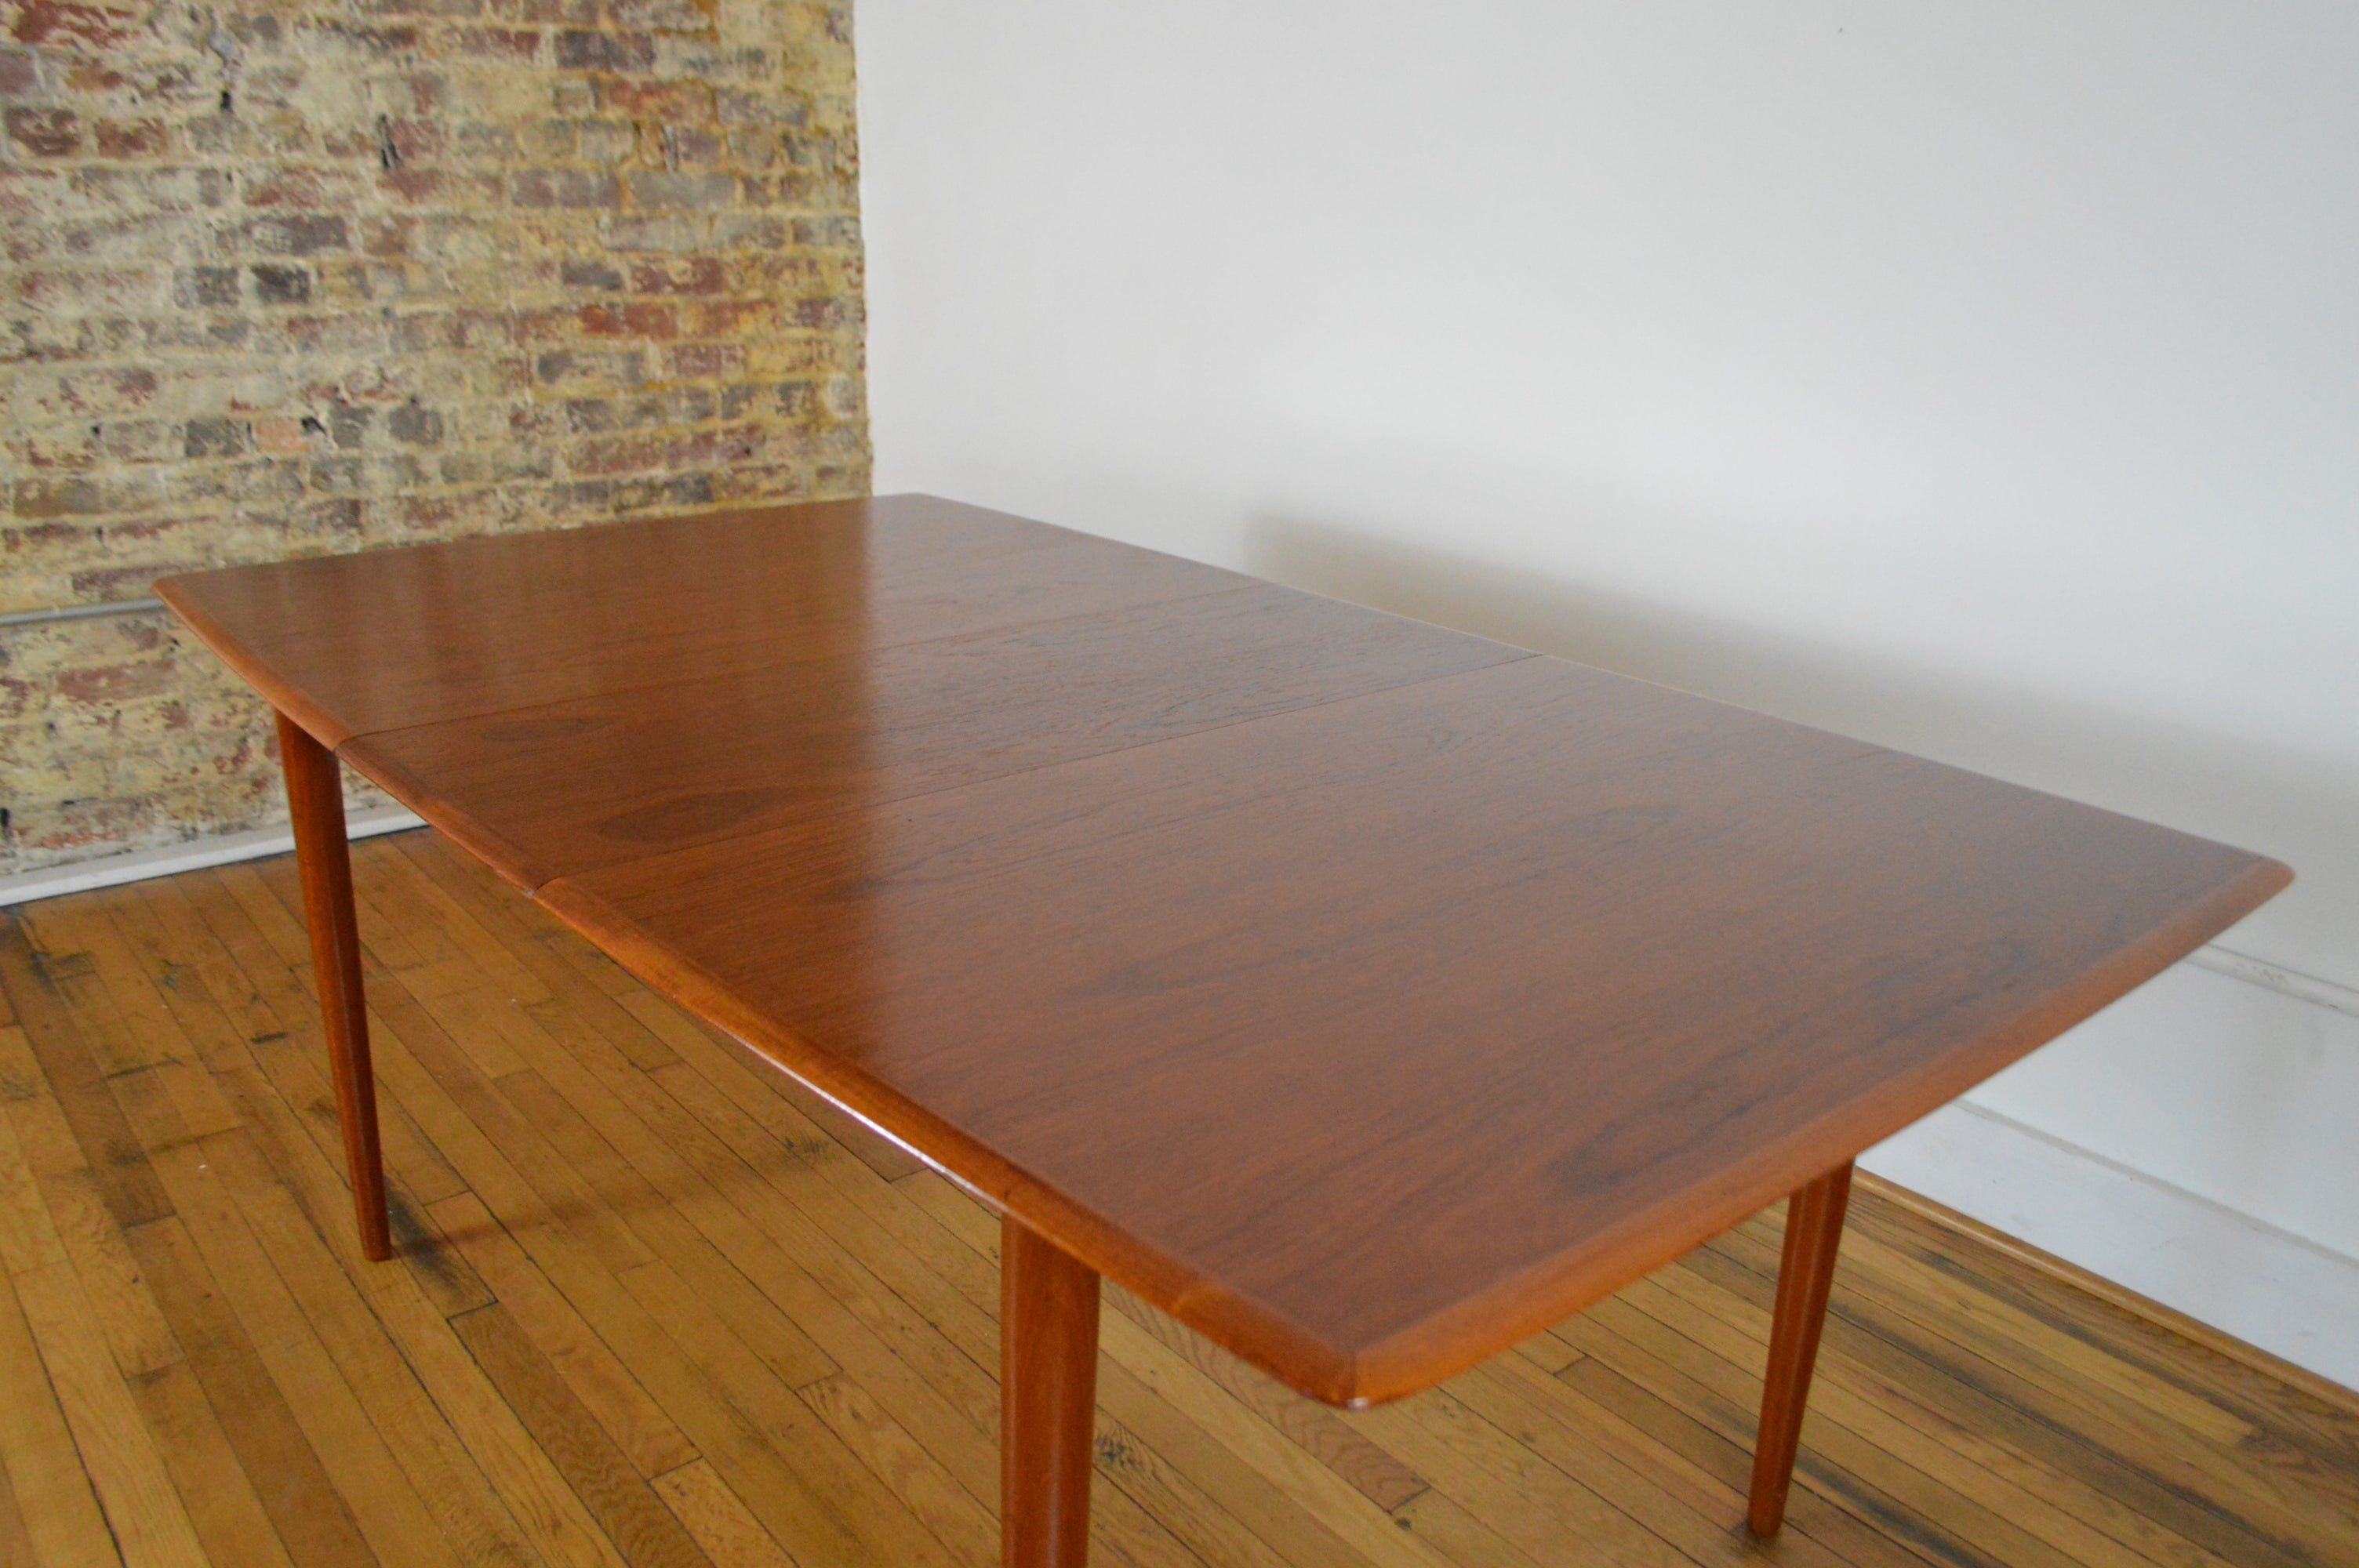 Excellent Danish Modern Teak Dining Table With Self Storing Extension Galaxiemodern